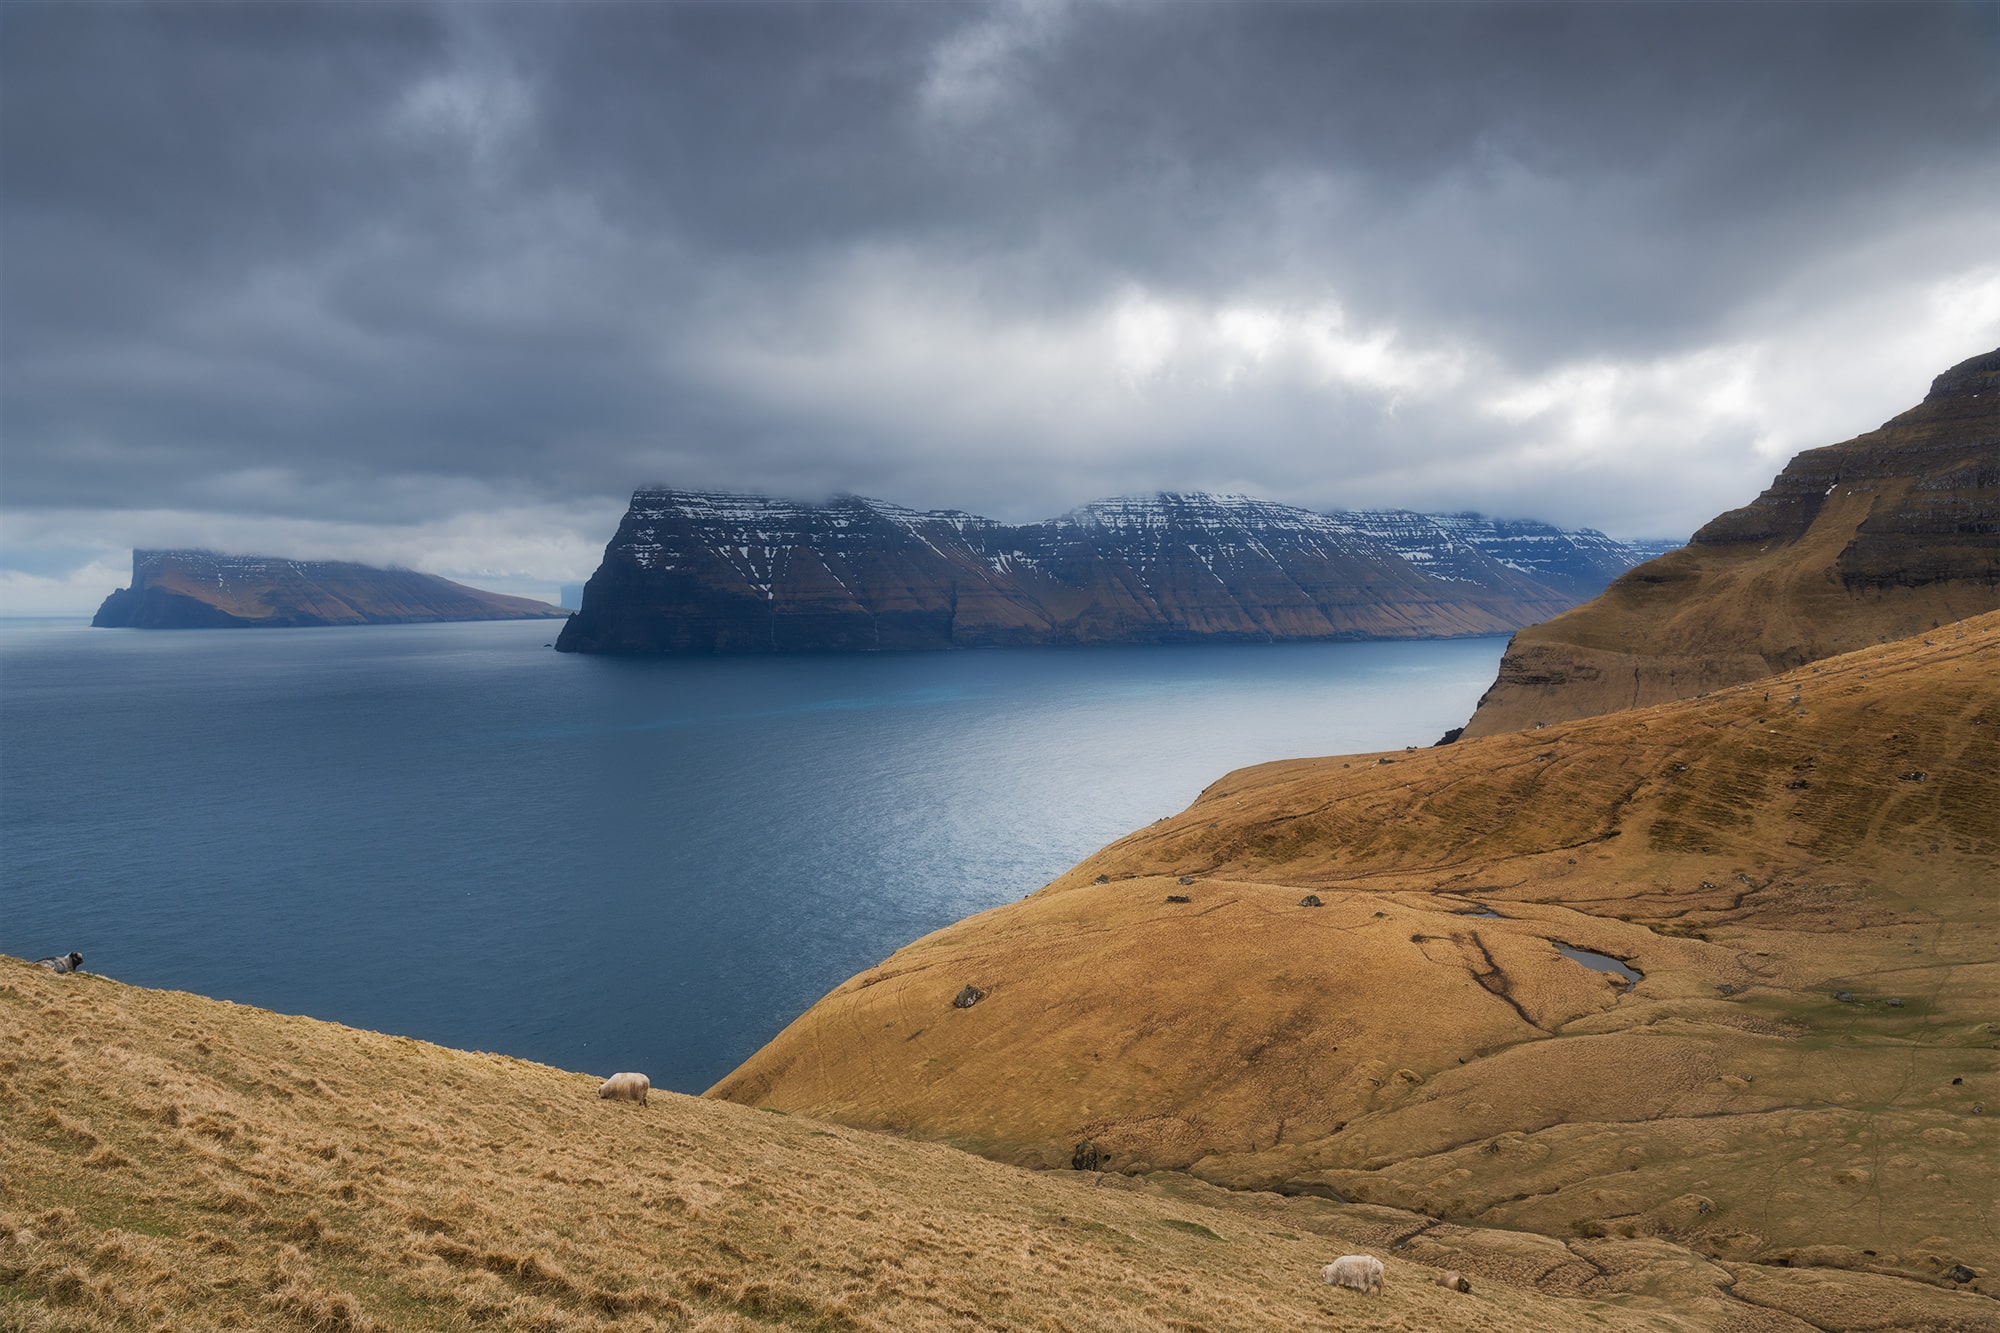 Embark on a visual journey through the captivating landscapes of the Faroe Islands with this stunning landscape photograph. Witness the dramatic vista of Kalsoy Island under a dark and brooding sky, characteristic of the epic scenery of this remote archipelago. This mesmerizing image captures the raw beauty and rugged charm of the Faroe Islands, inviting viewers to immerse themselves in its breathtaking allure. Experience the magic of nature's drama unfolding through the lens of this evocative landscape photograph. Explore the timeless allure of the Faroe Islands in this captivating portrayal of its epic landscapes.